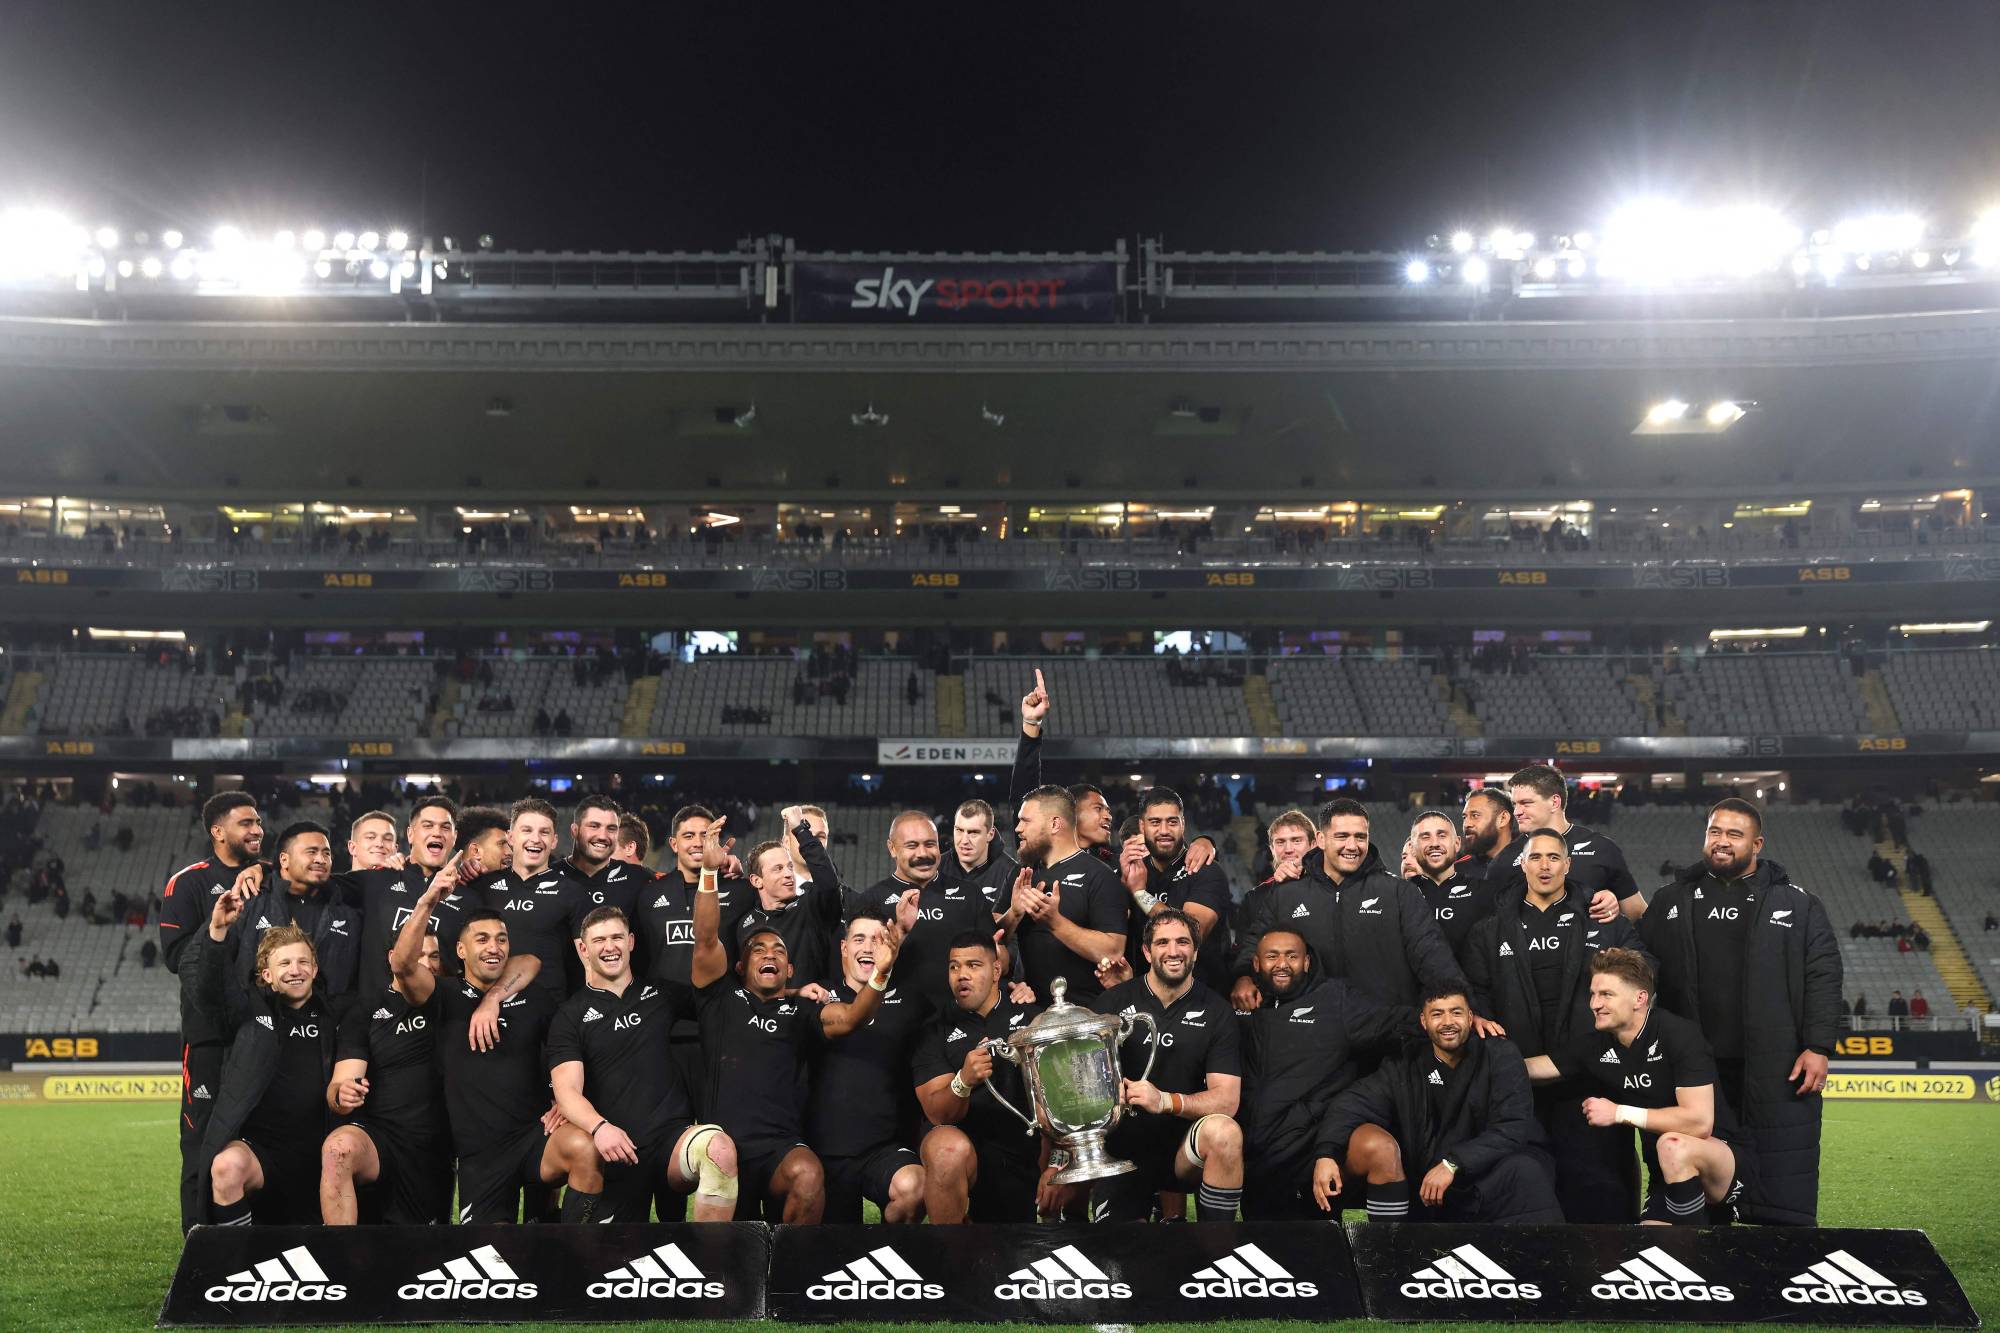 All Blacks lay down a marker before heading into the unknown